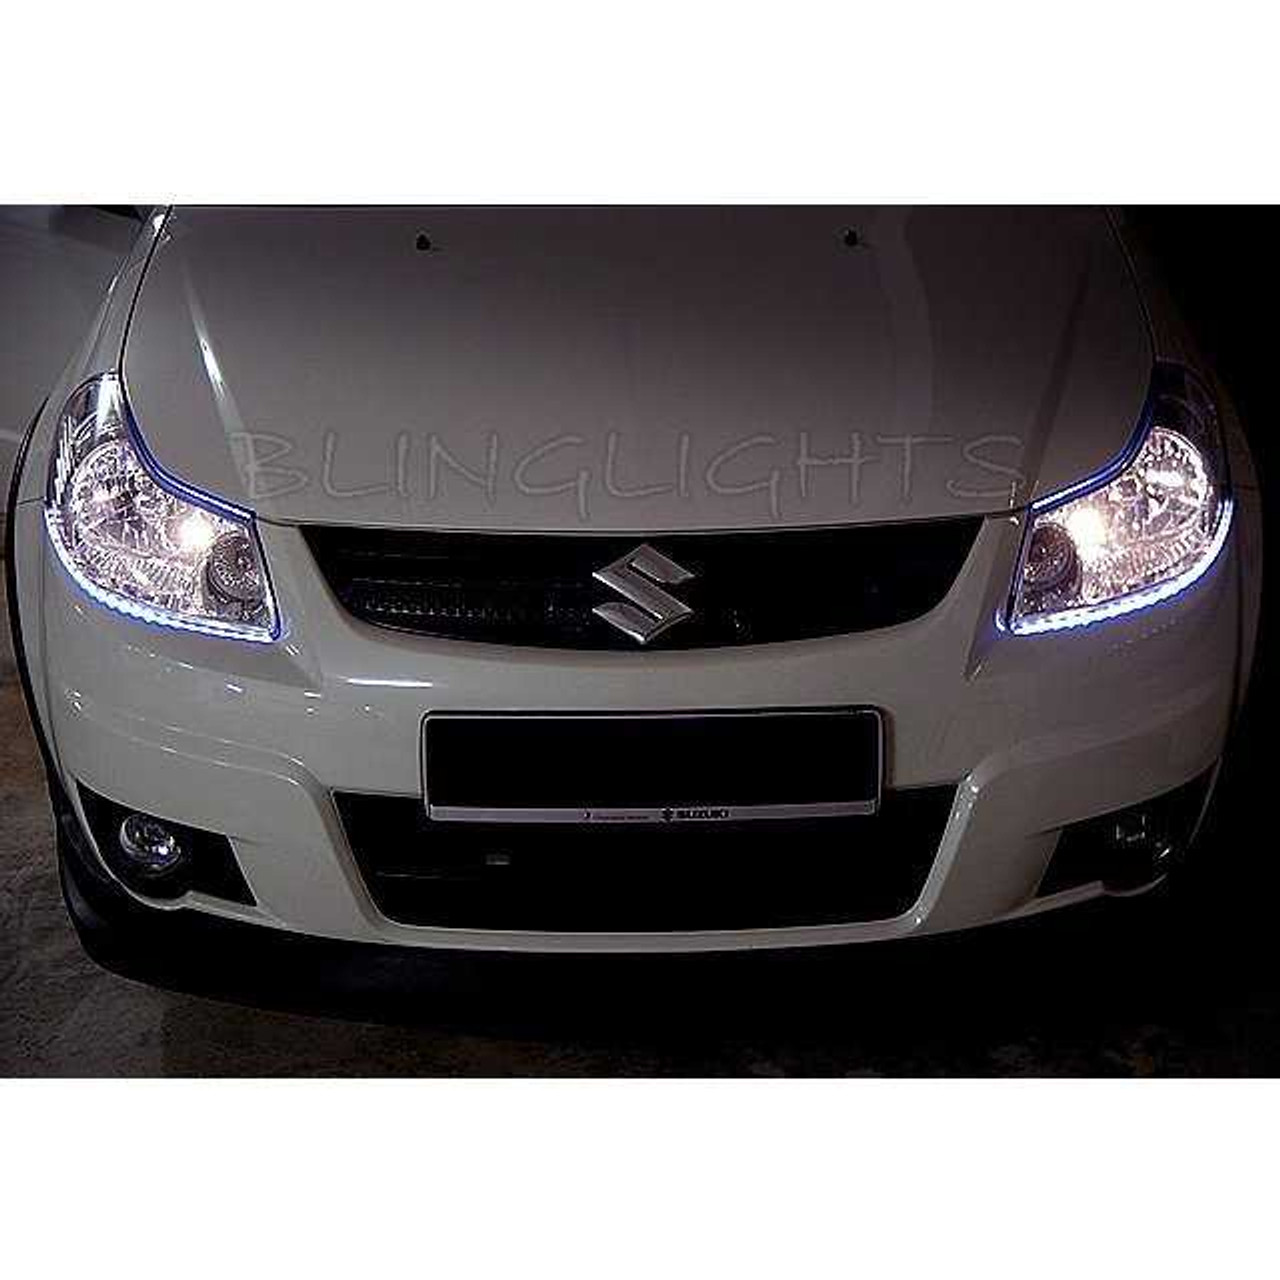 Fiat Sedici LED DRL Light Strips for Headlamps Headlights Head Lamps Day Time Running Strip Lights